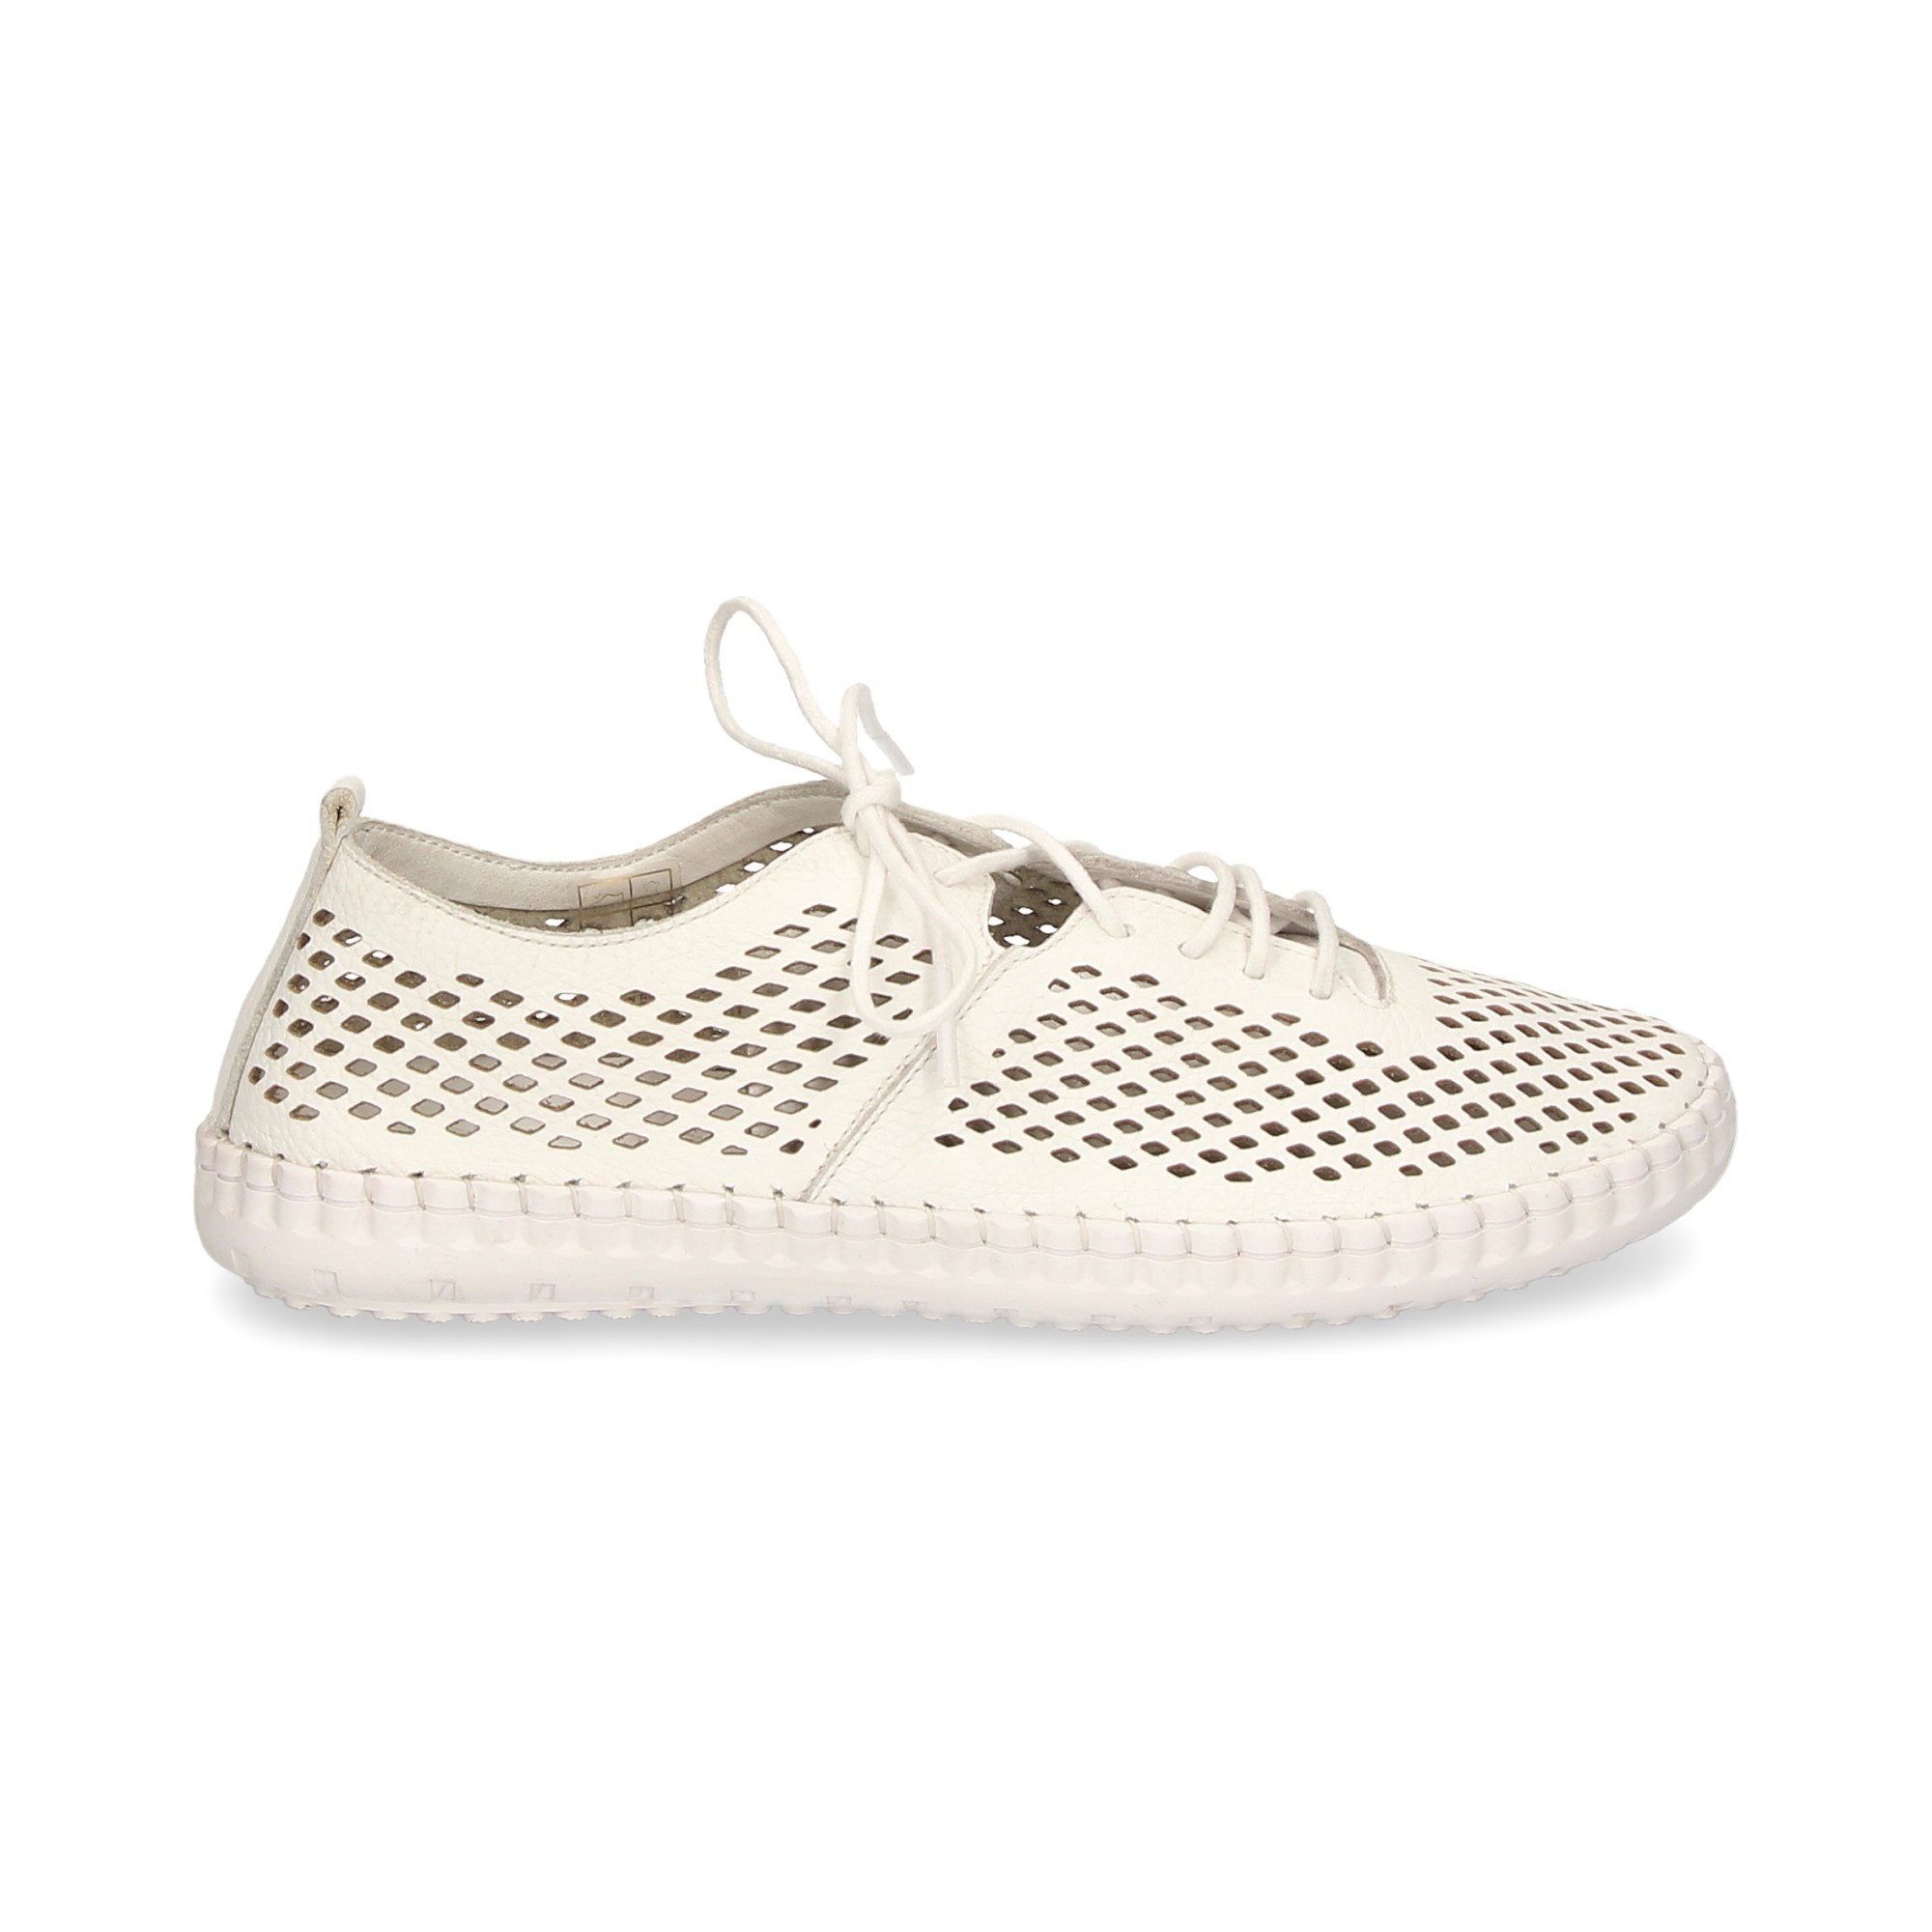 sporty-perforated-weisse-haut